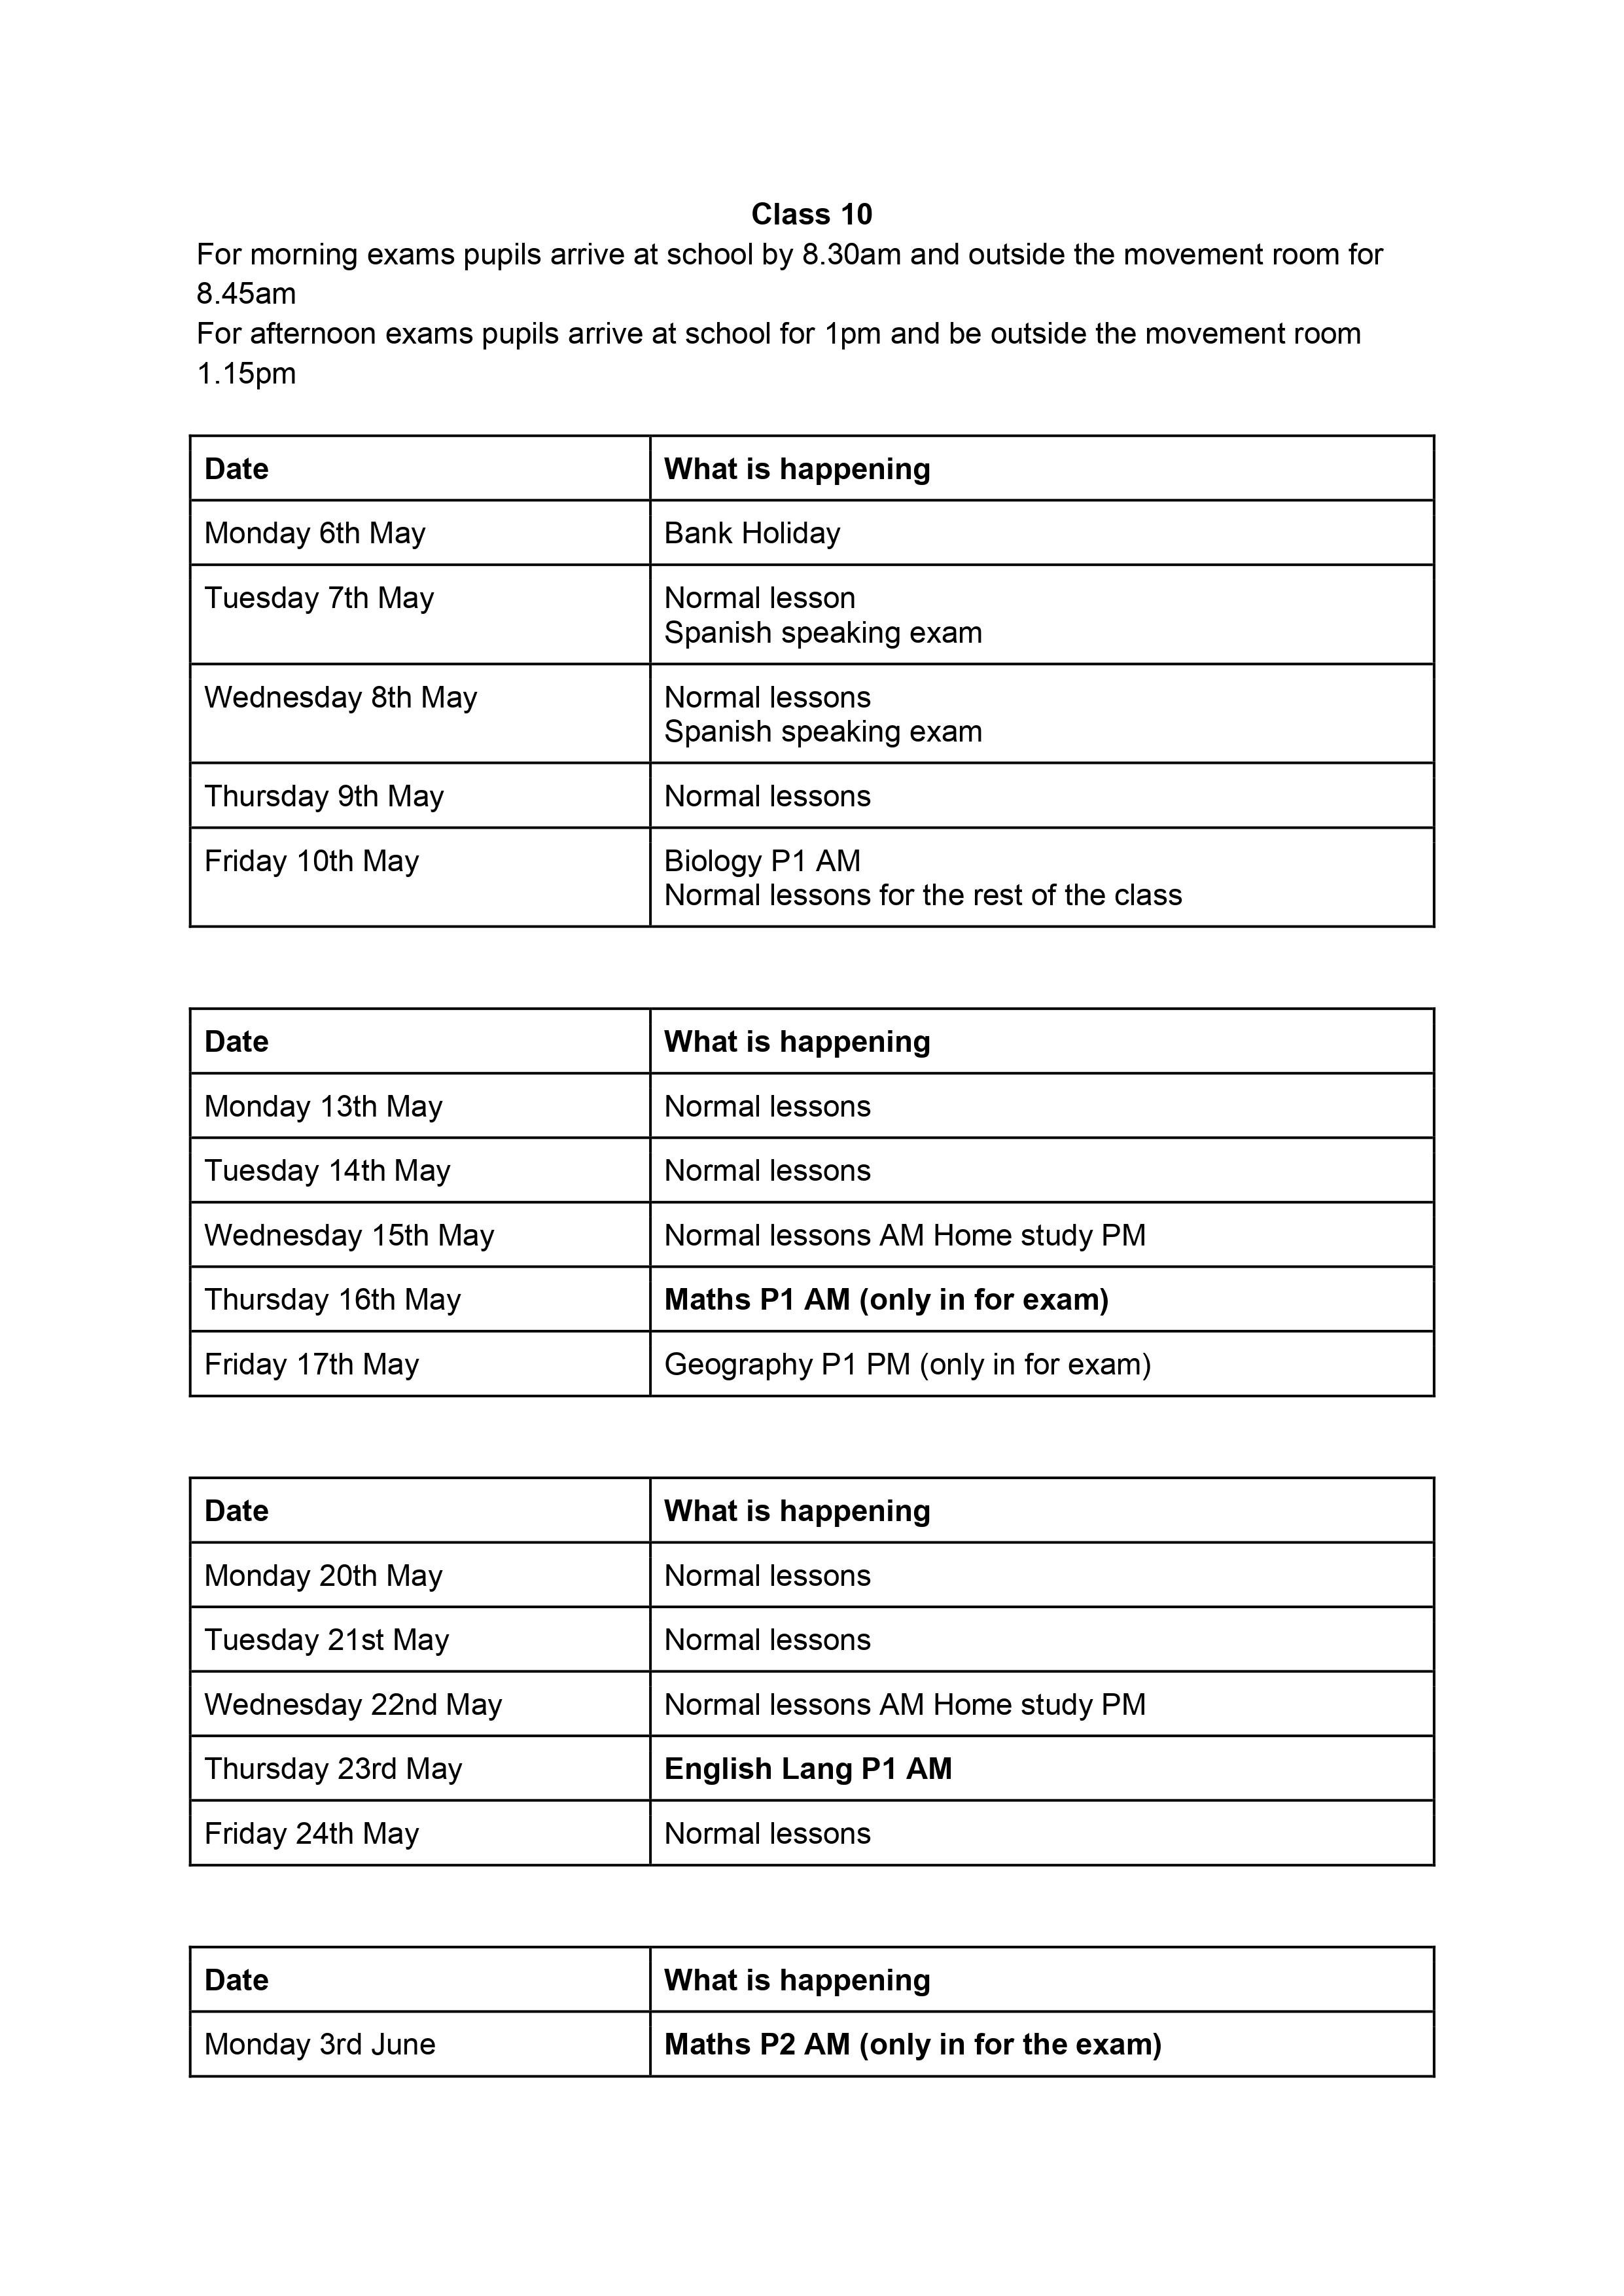 Class 10 exam_study timetable 24 (1)-images-1.jpg